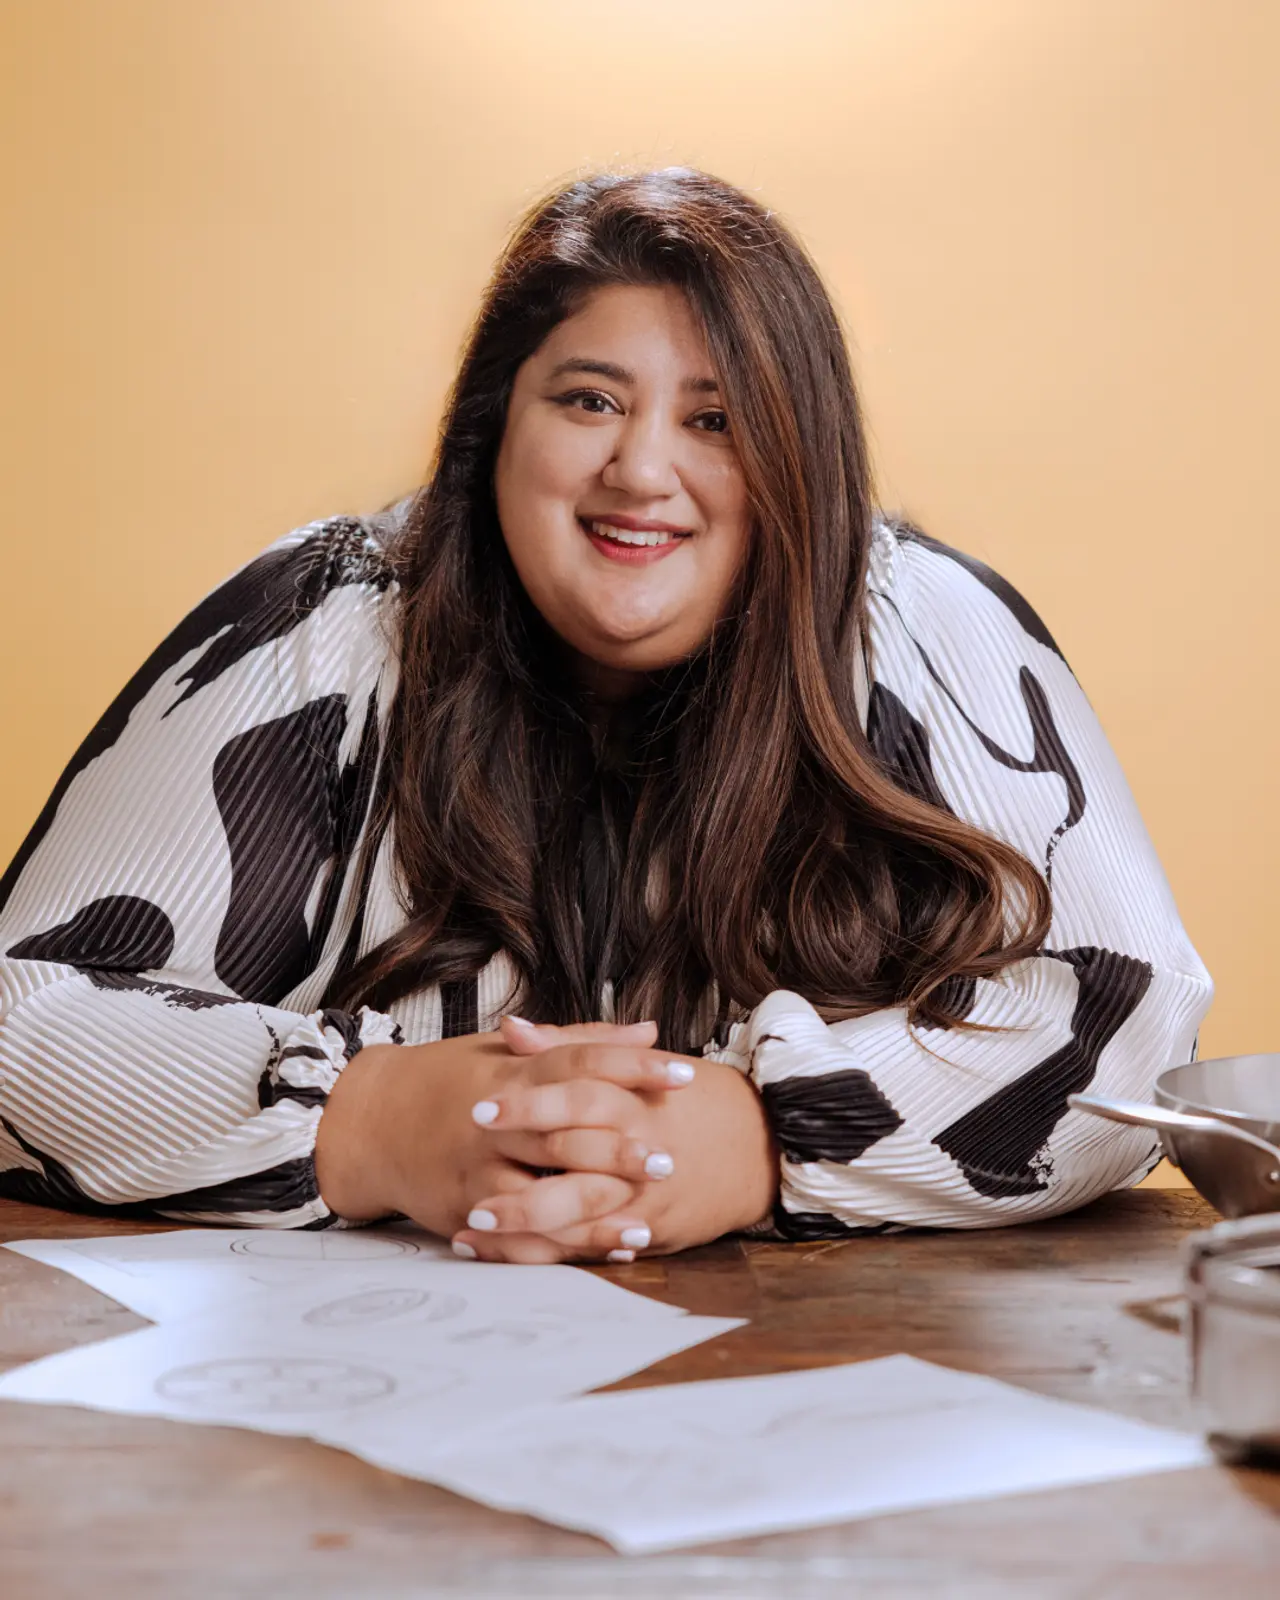 A smiling person with long hair is sitting at a table with papers in front of them, wearing a black and white patterned top.